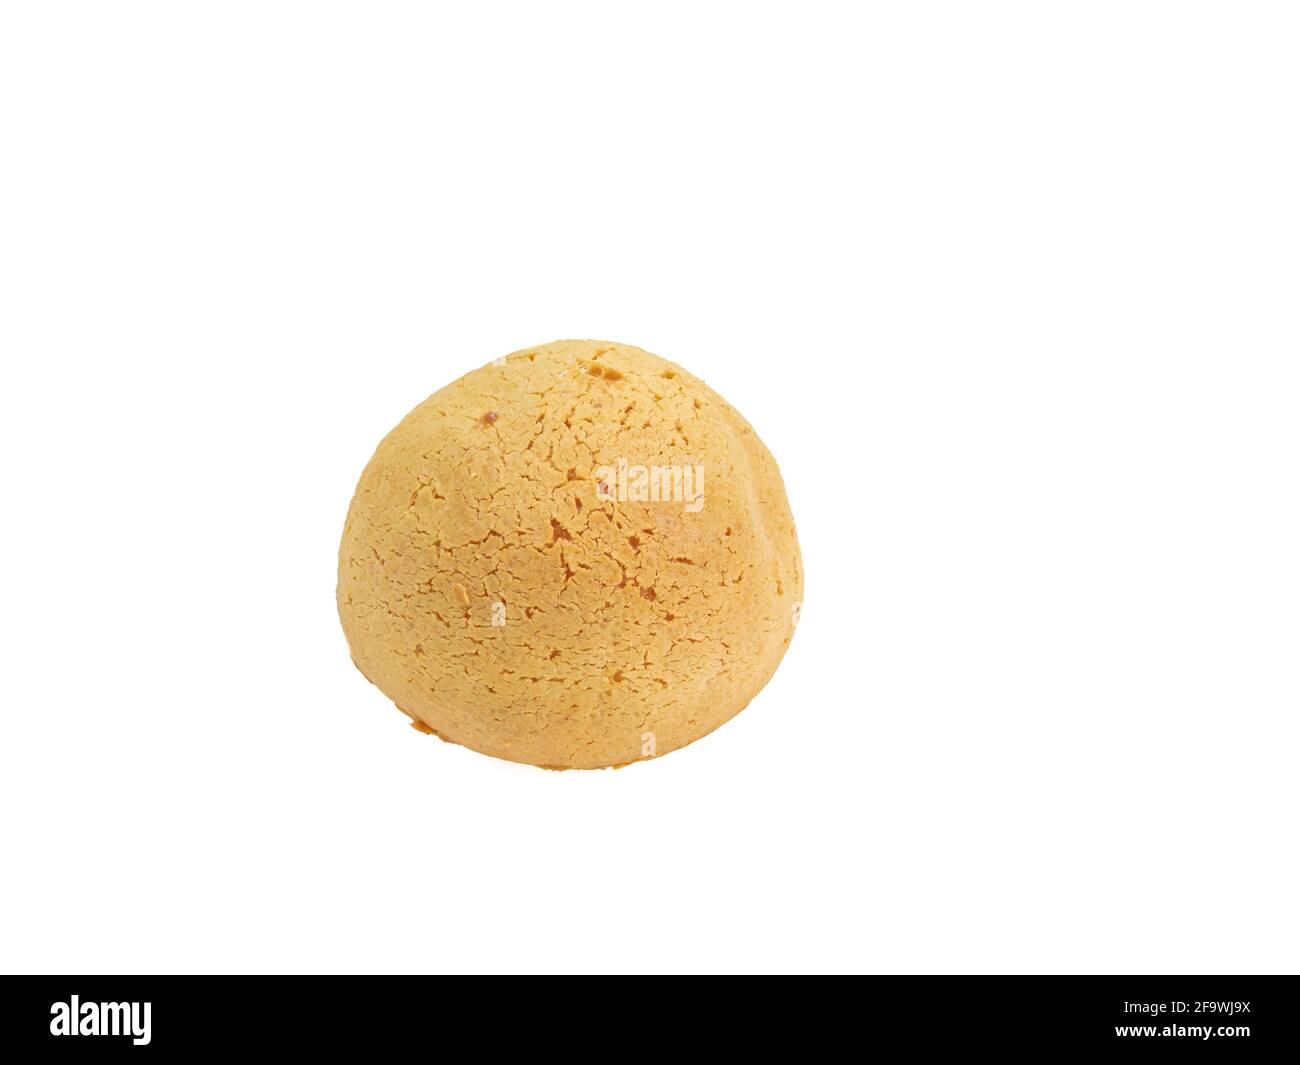 Mochi bun, a close up of Japanese traditional homemade mochi bread bakery isolated on white background. Stock Photo